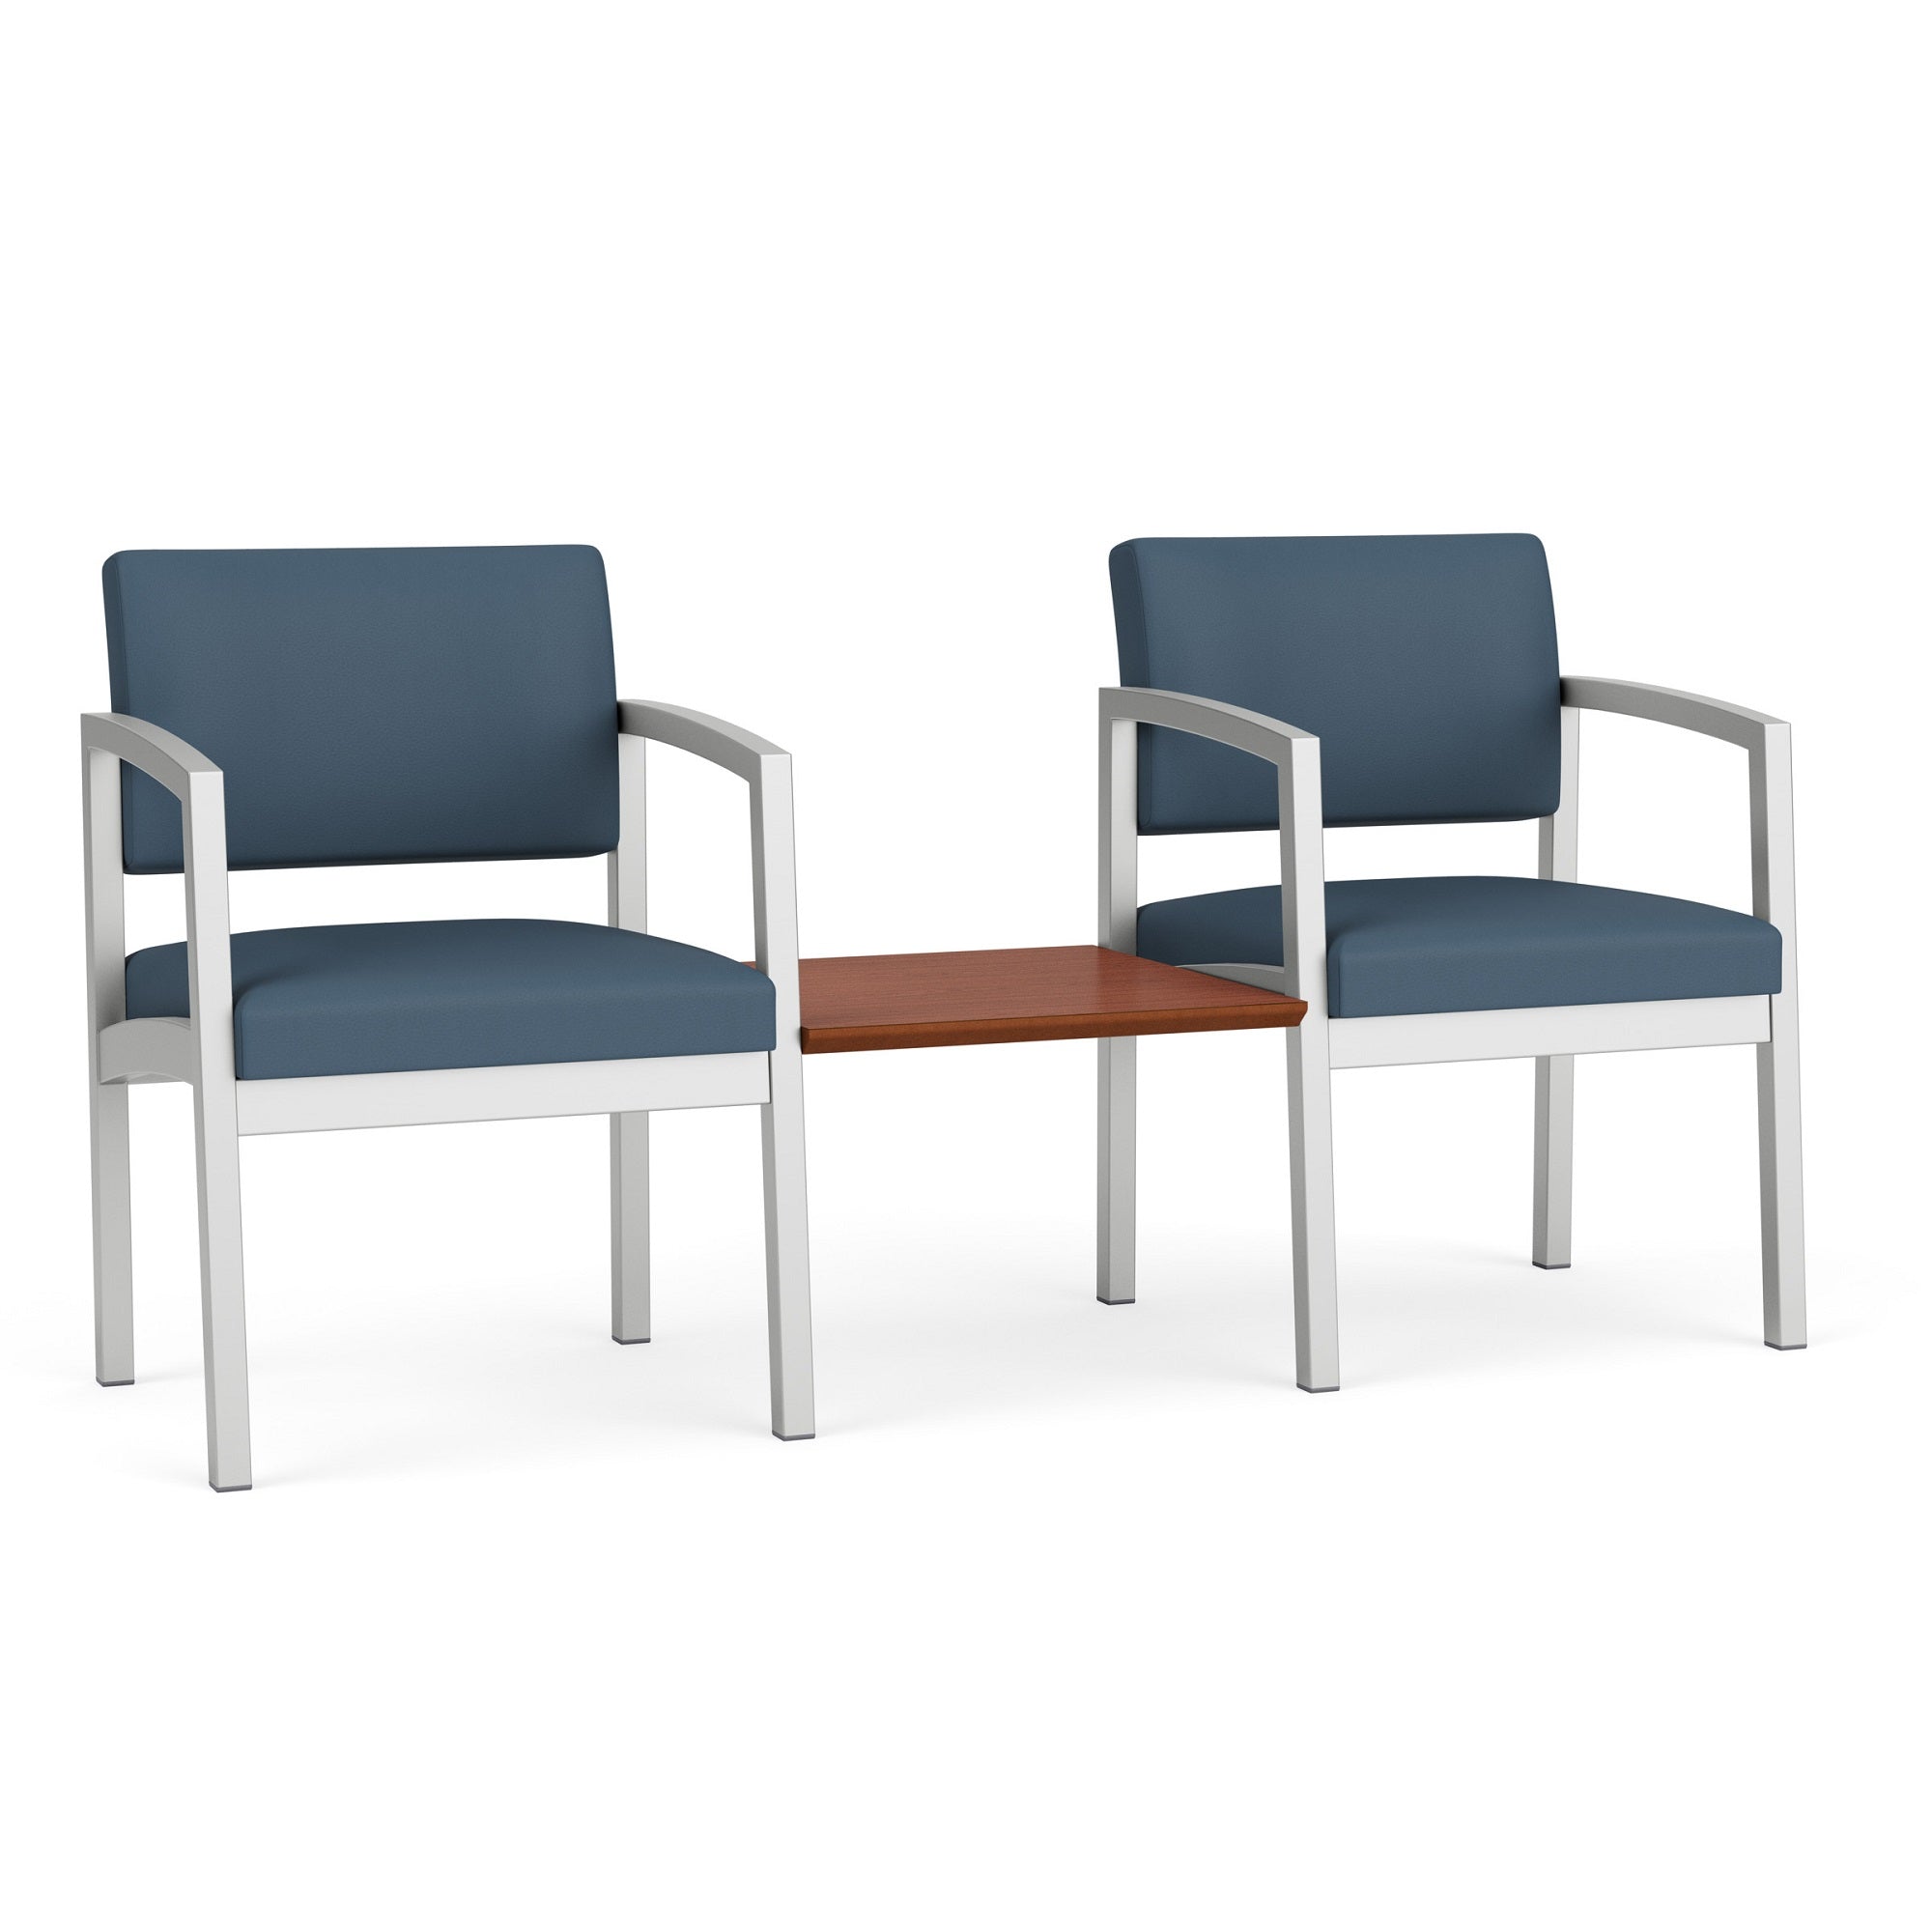 Lenox Steel Collection Reception Seating, 2 Chairs with Connecting Center Table, Healthcare Vinyl Upholstery, FREE SHIPPING